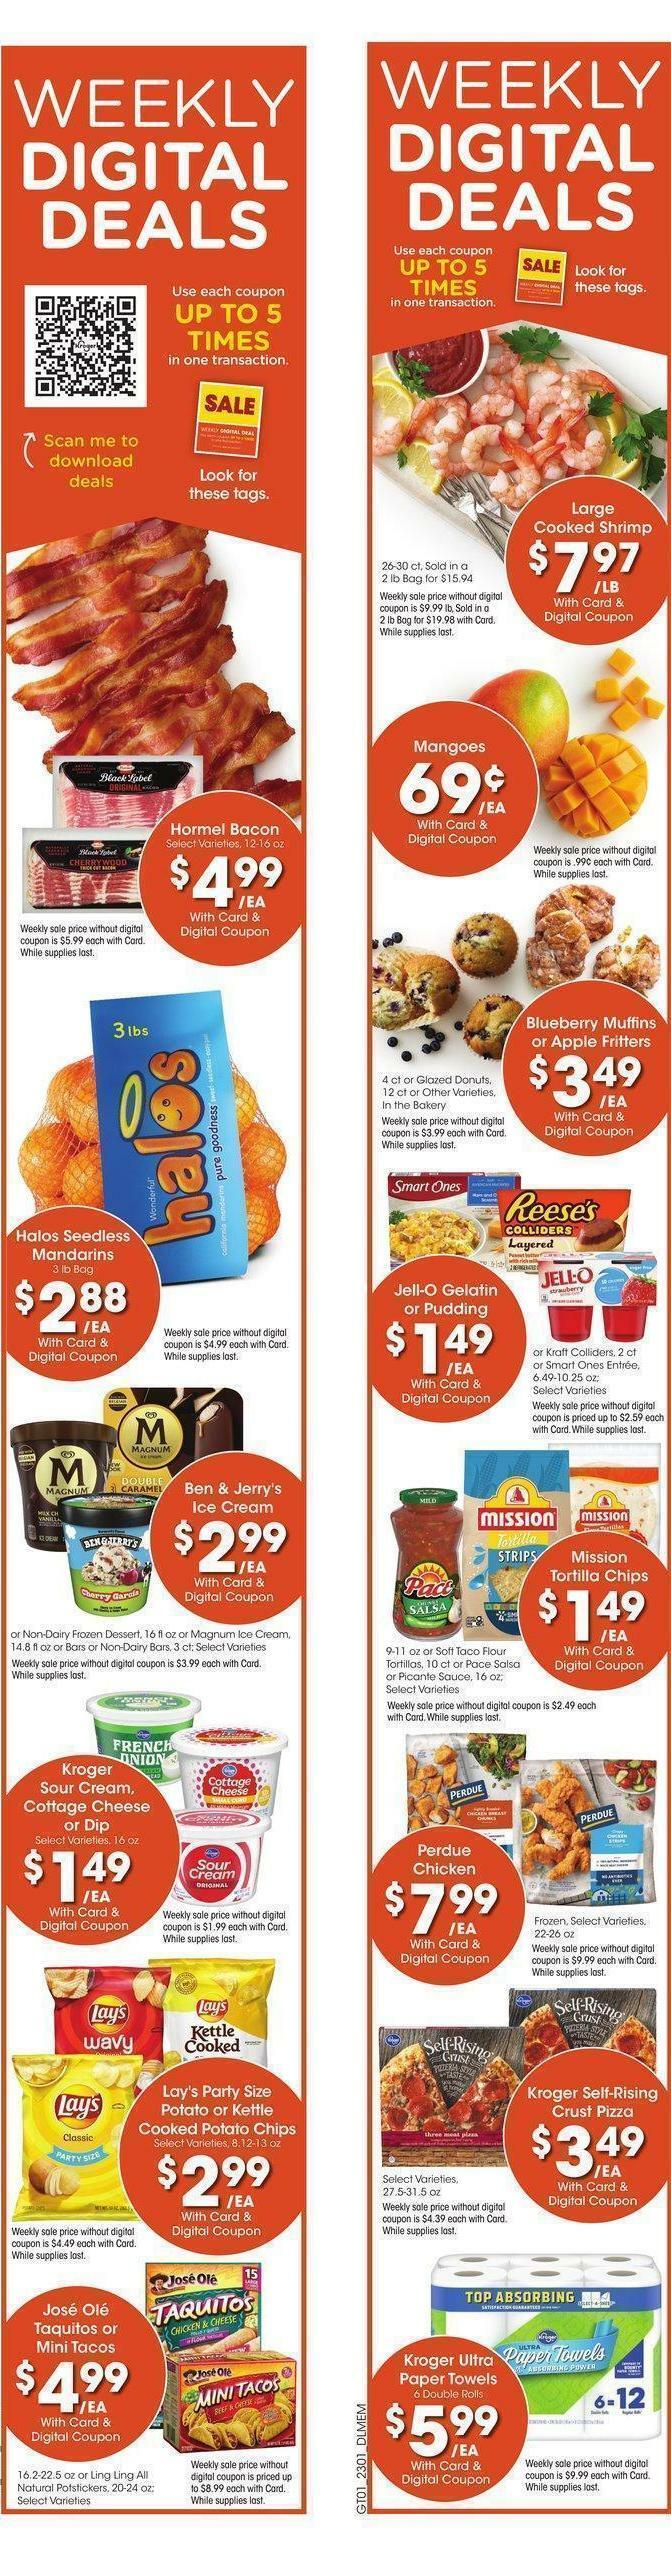 Kroger Weekly Ad from February 1